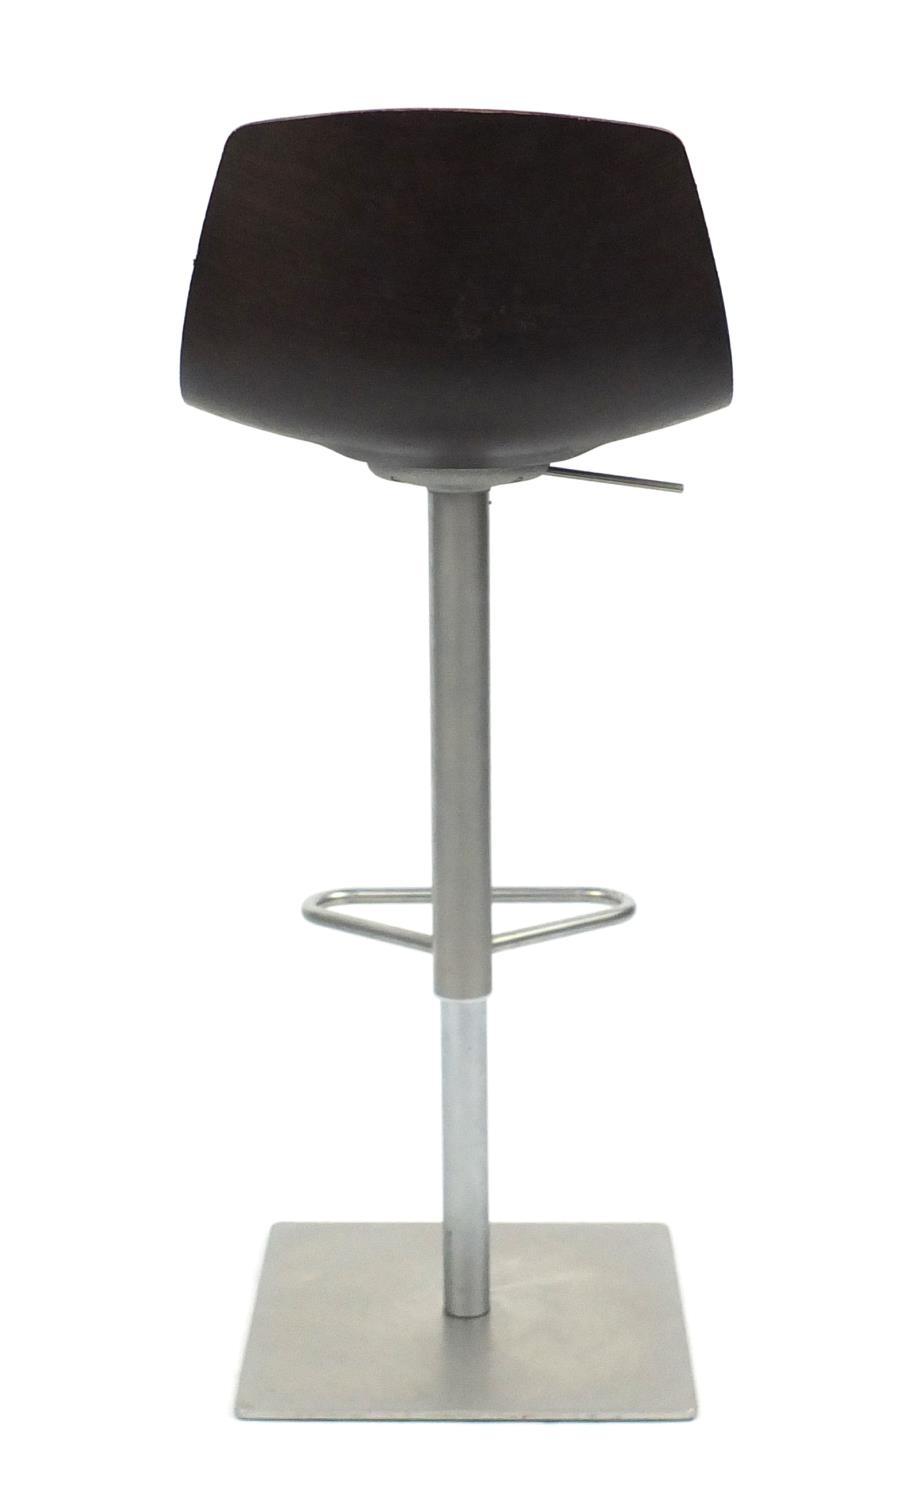 Lapalma Miunn adjustable bar stool designed by Karri Monni, 101cm high : For Further Condition - Image 4 of 6